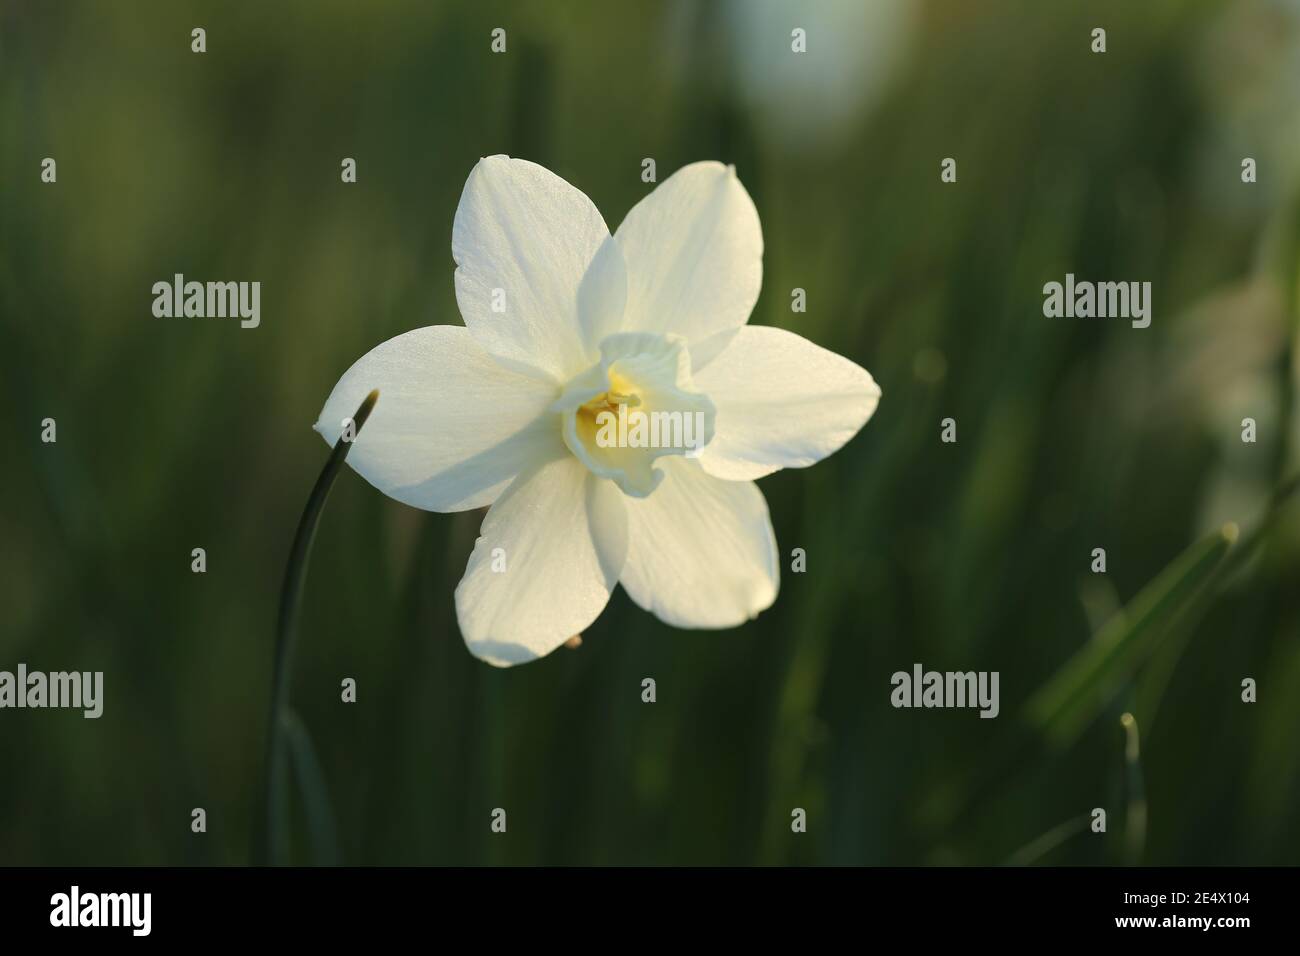 White daffodils flowers in the sunbeams on a blurred garden background. Spring flowers.Floriculture and horticulture concept. Growing daffodils Stock Photo